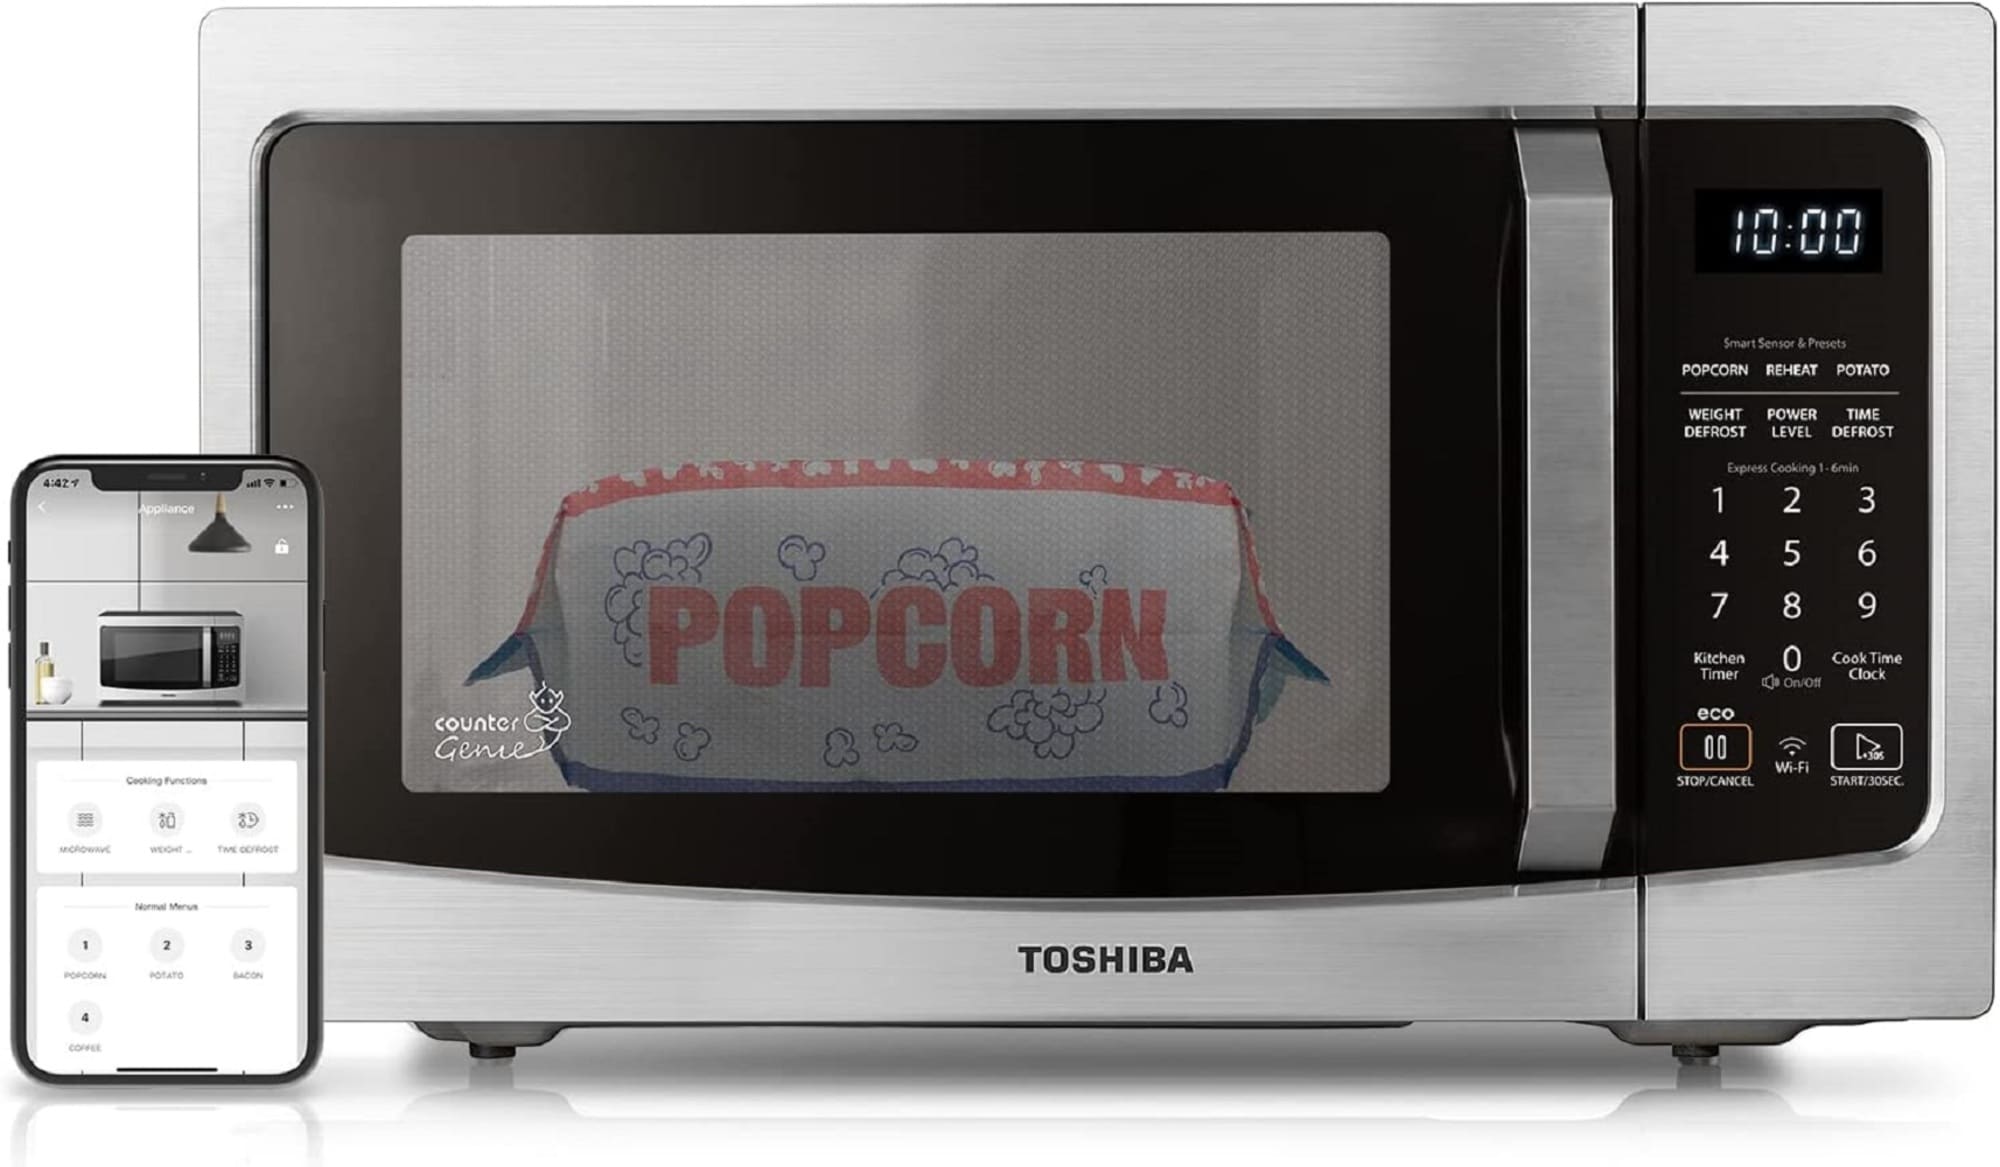 Best Buy: Toshiba 1.5 Cu. Ft. Convection Countertop Microwave with